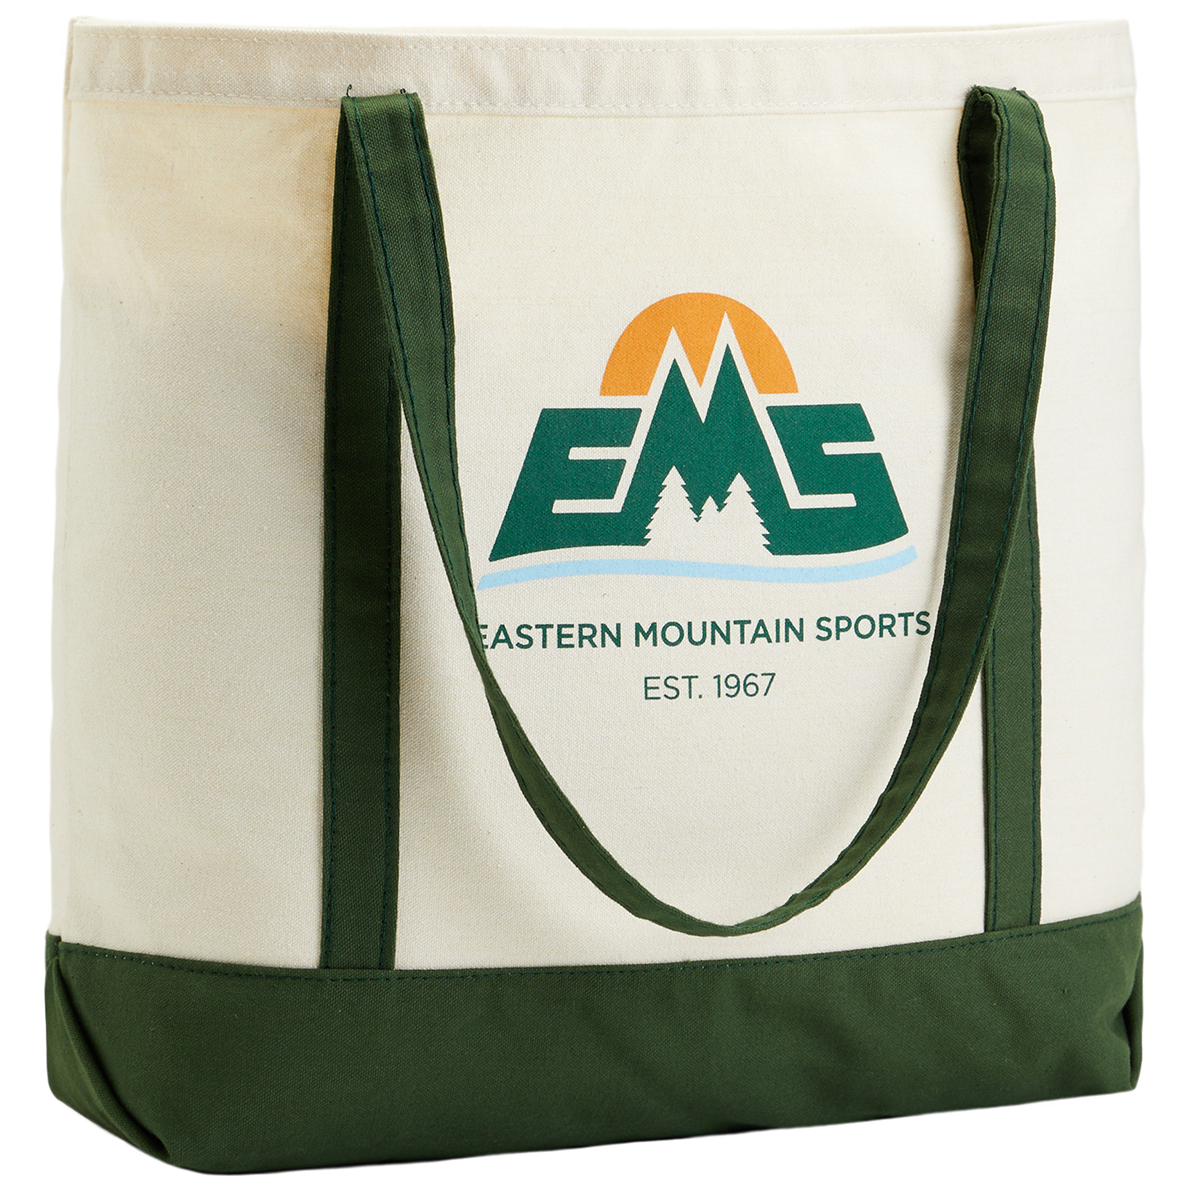 Ems Canvas Tote Bag, Green